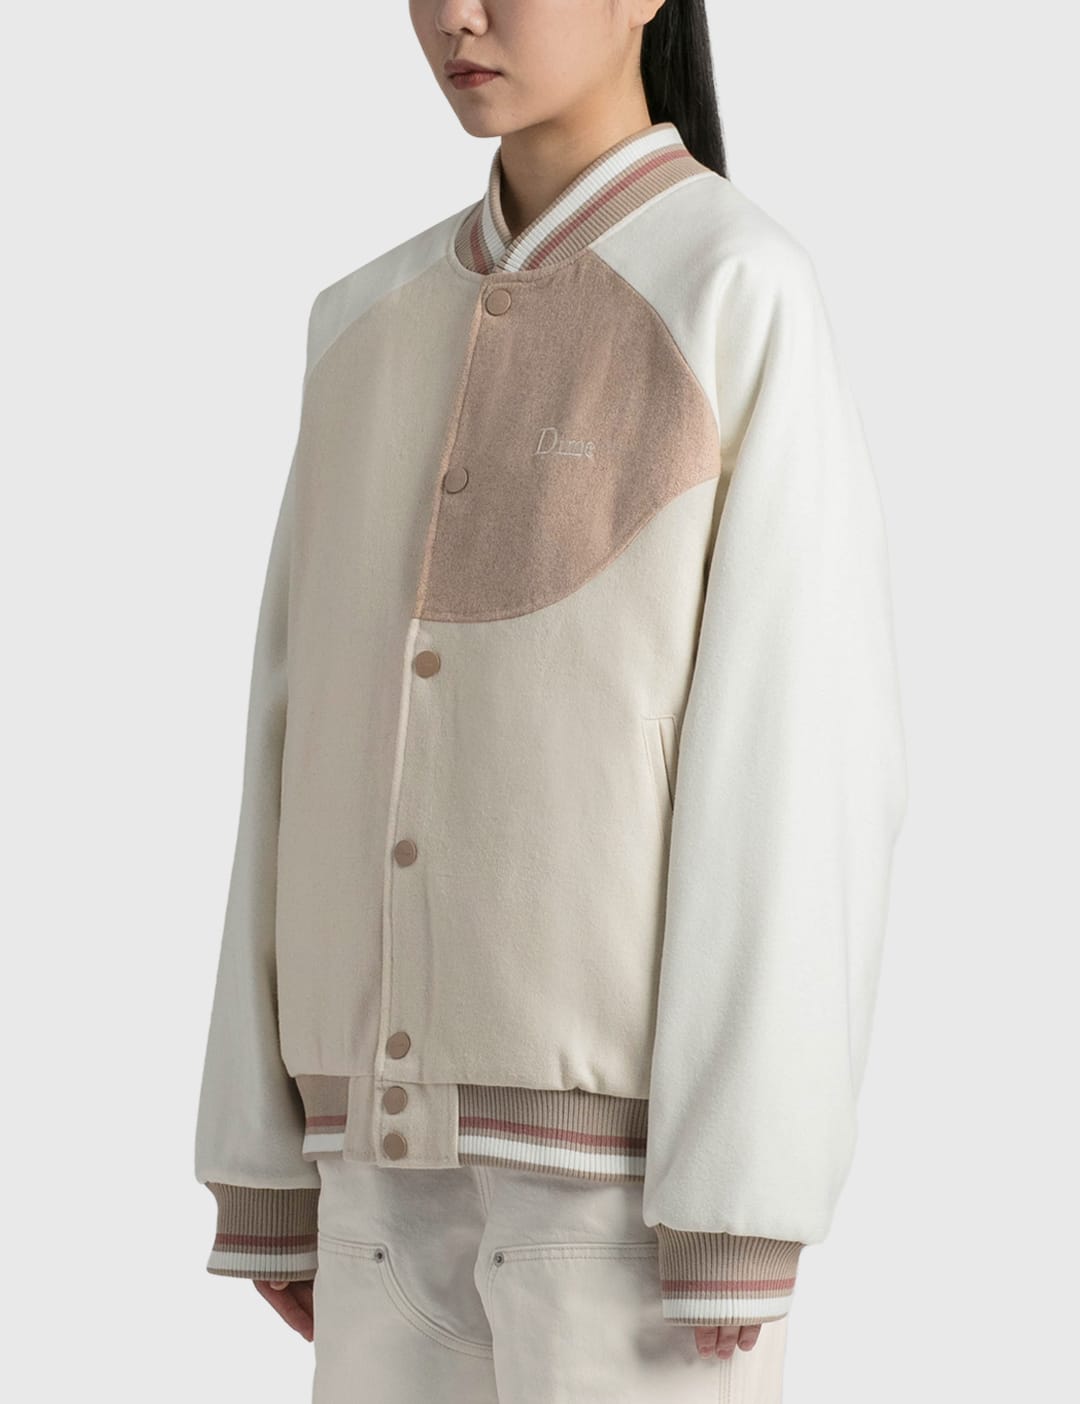 Dime - Letterman Wool Jacket | HBX - Globally Curated Fashion and